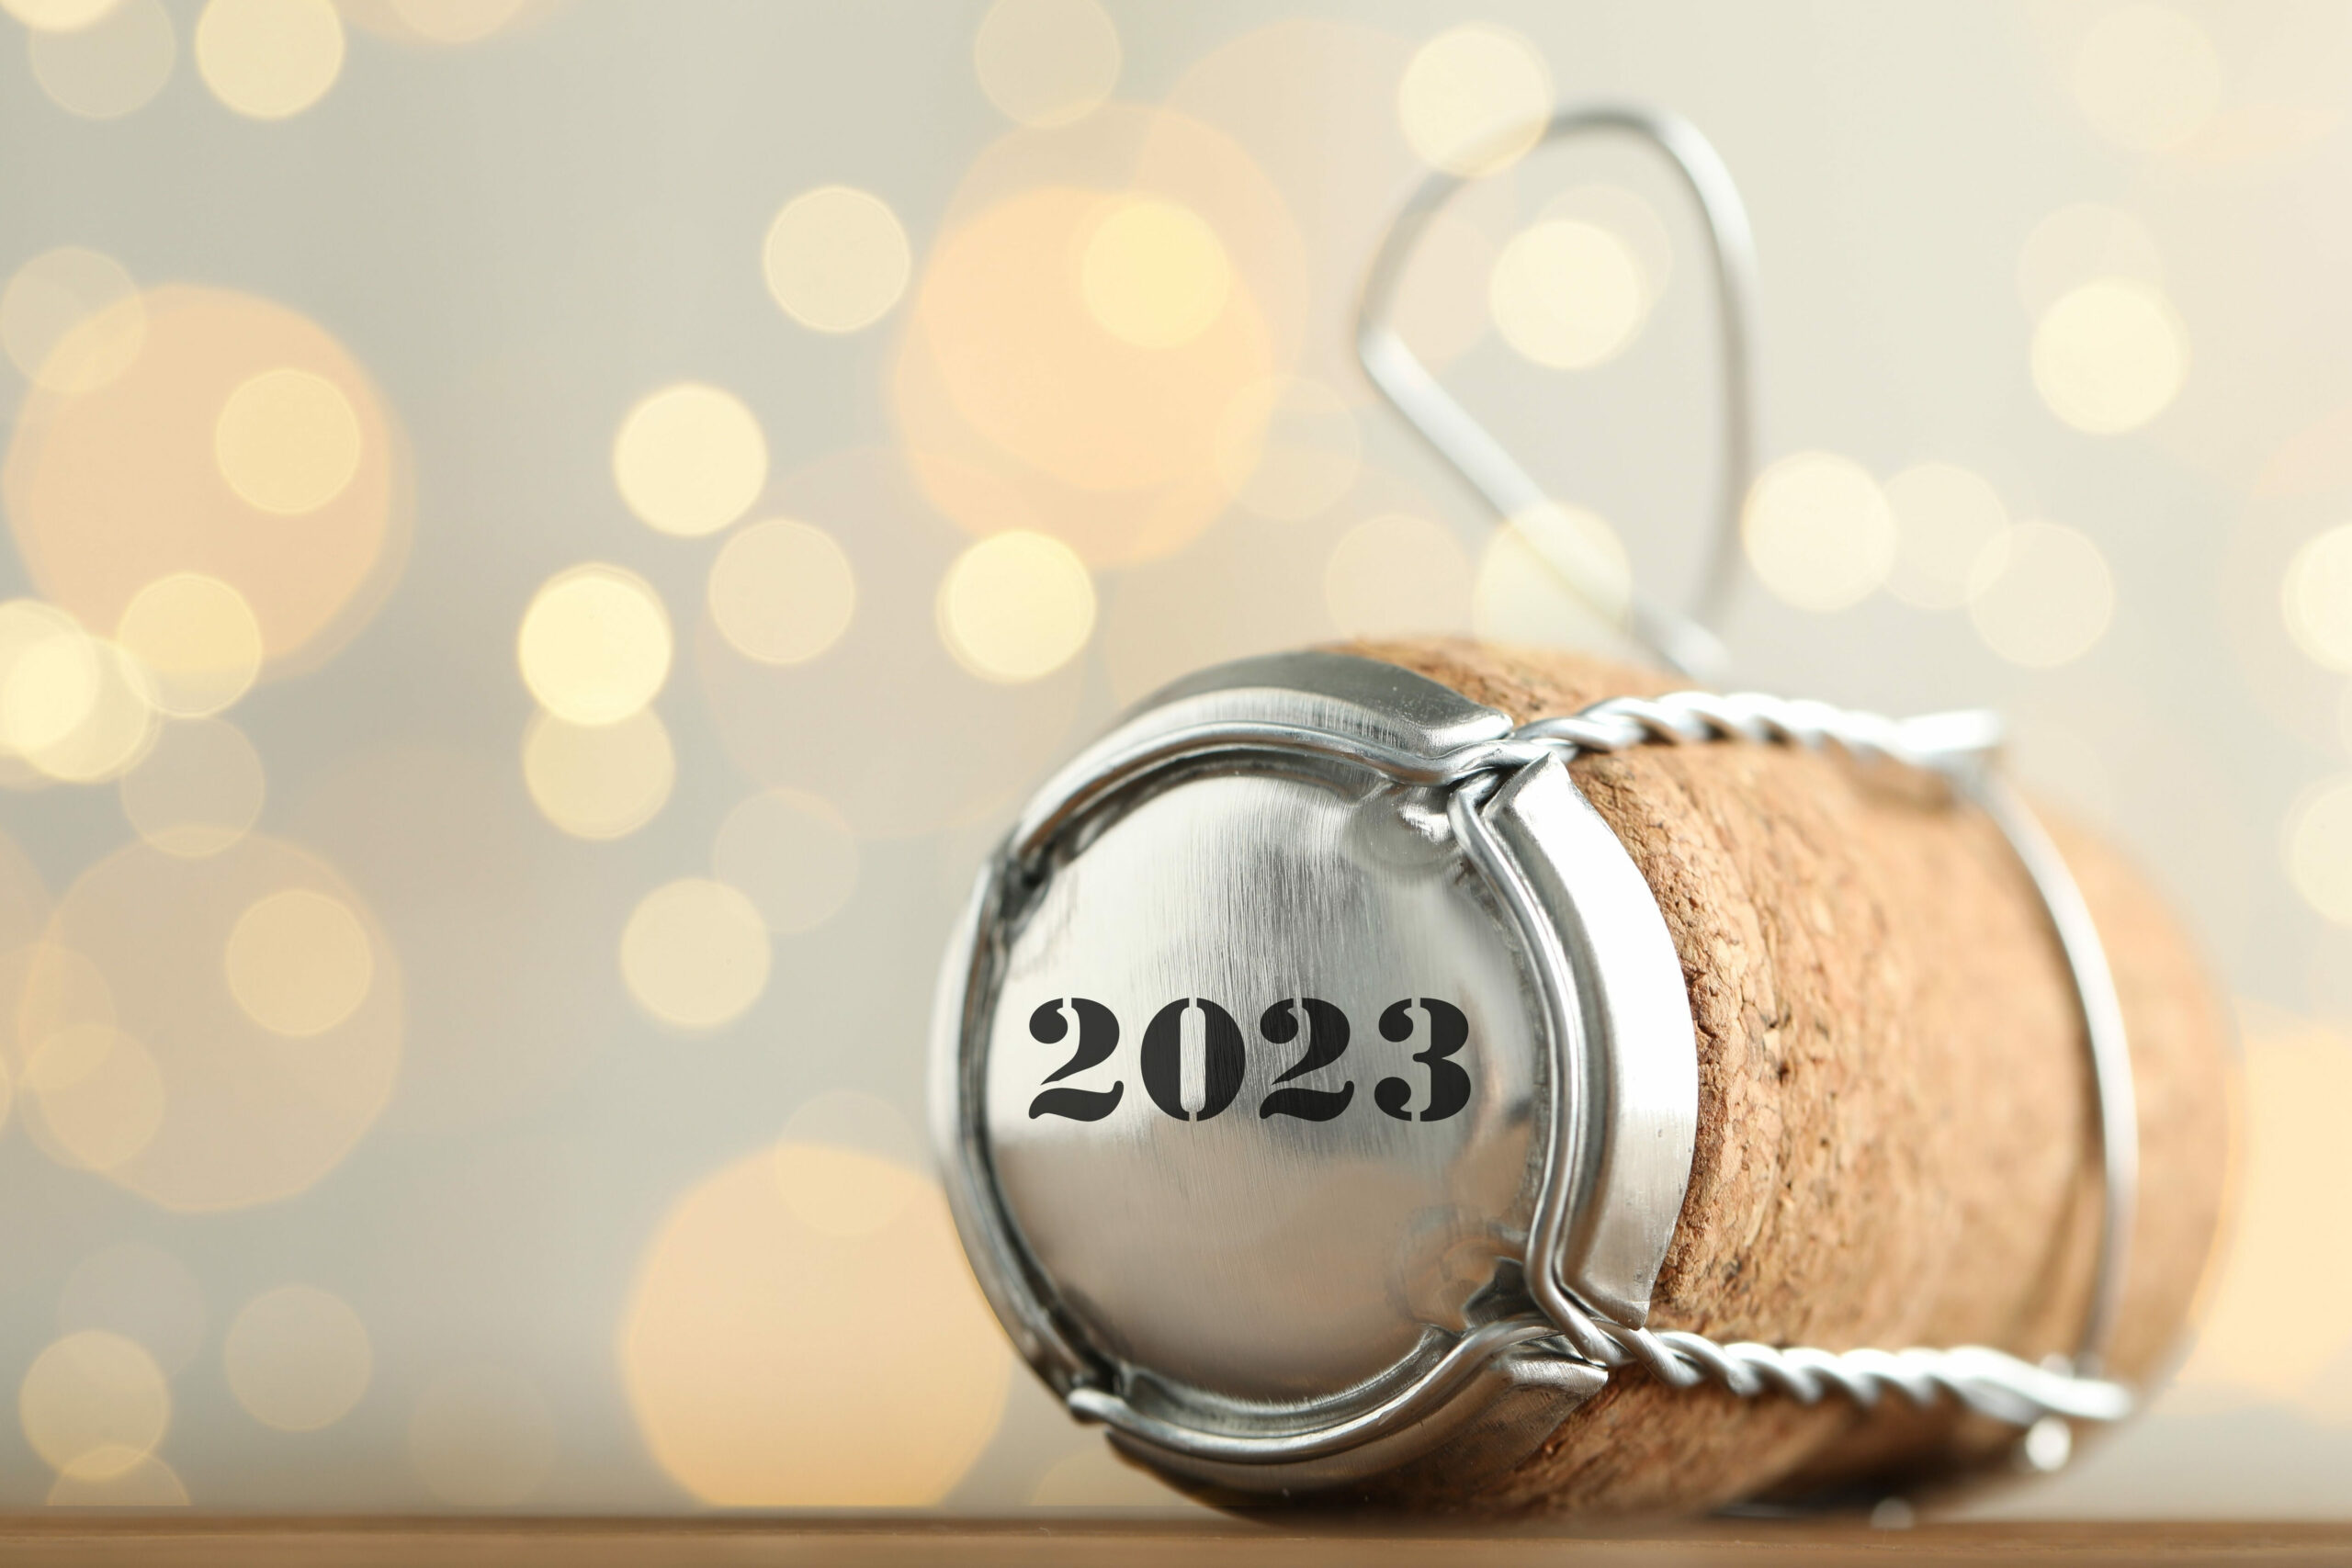 Sparkling wine cork and capsule with 2023 written on it against a sparkly silver and gold background.